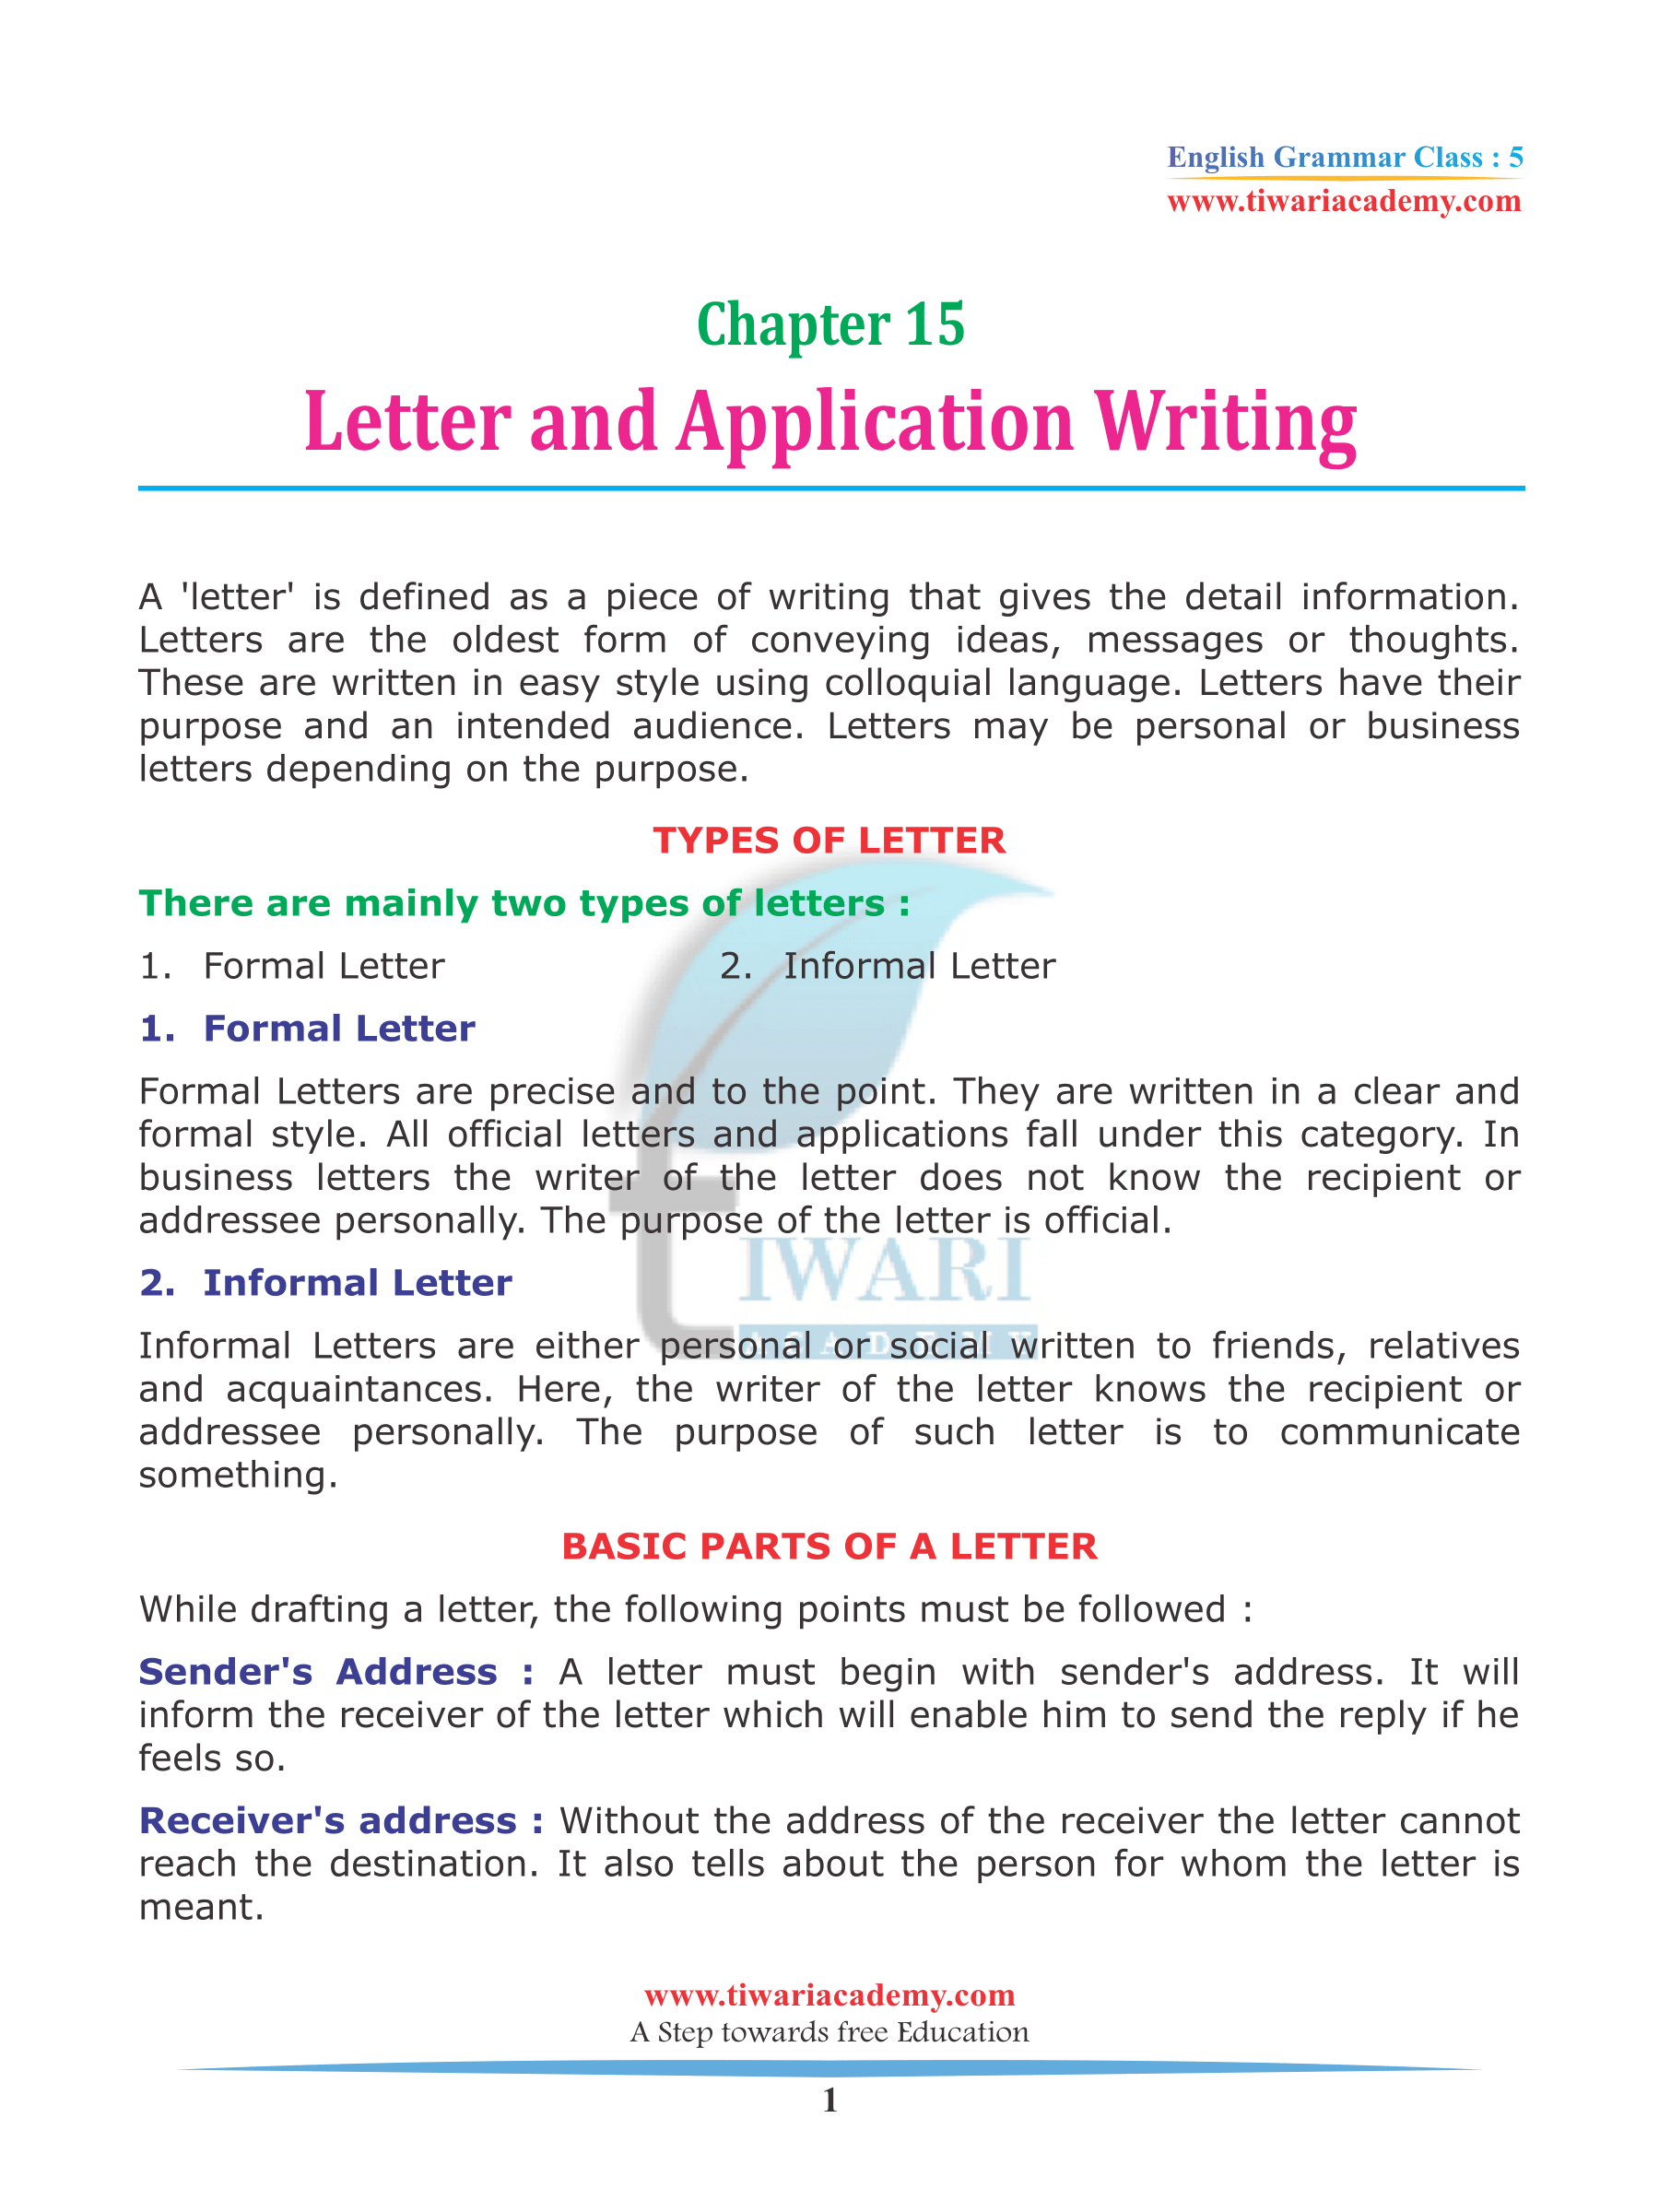 NCERT Solutions for Class 5 English Grammar Chapter 15 Letter and Application writing